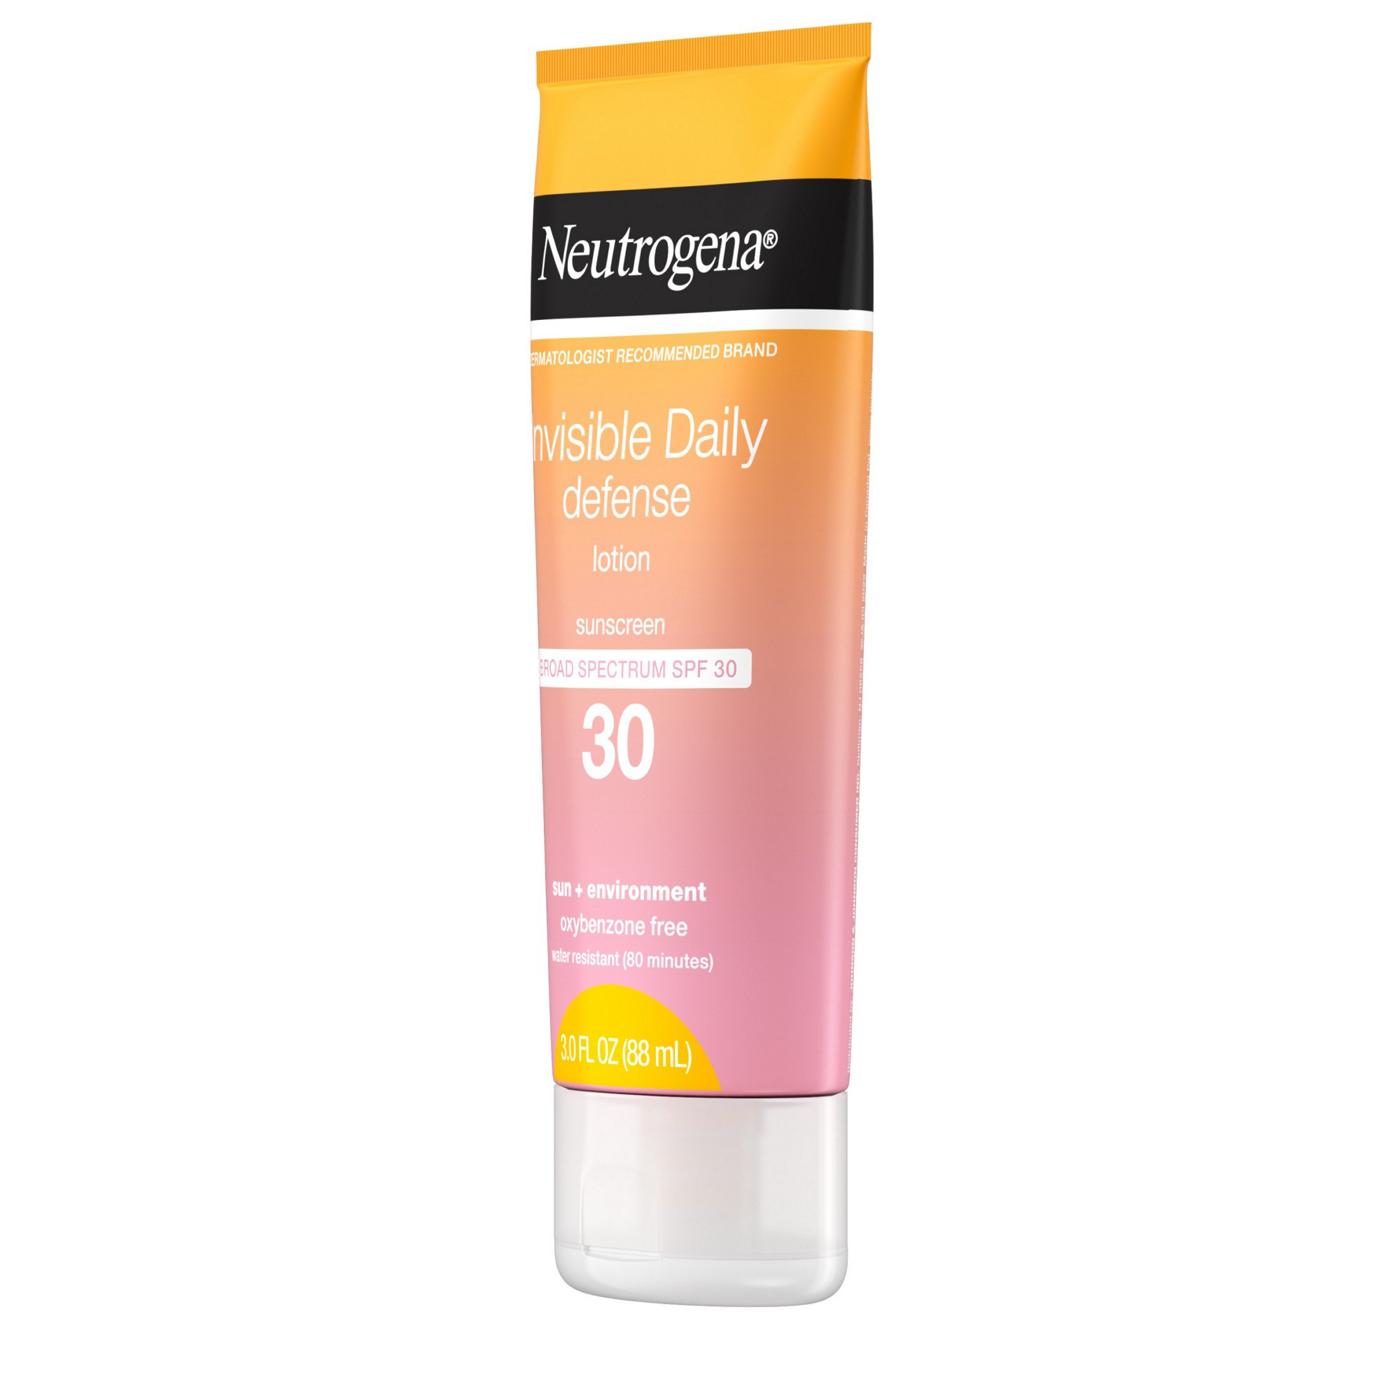 Neutrogena Invisible Daily Defense Sunscreen Lotion - SPF 30; image 2 of 5